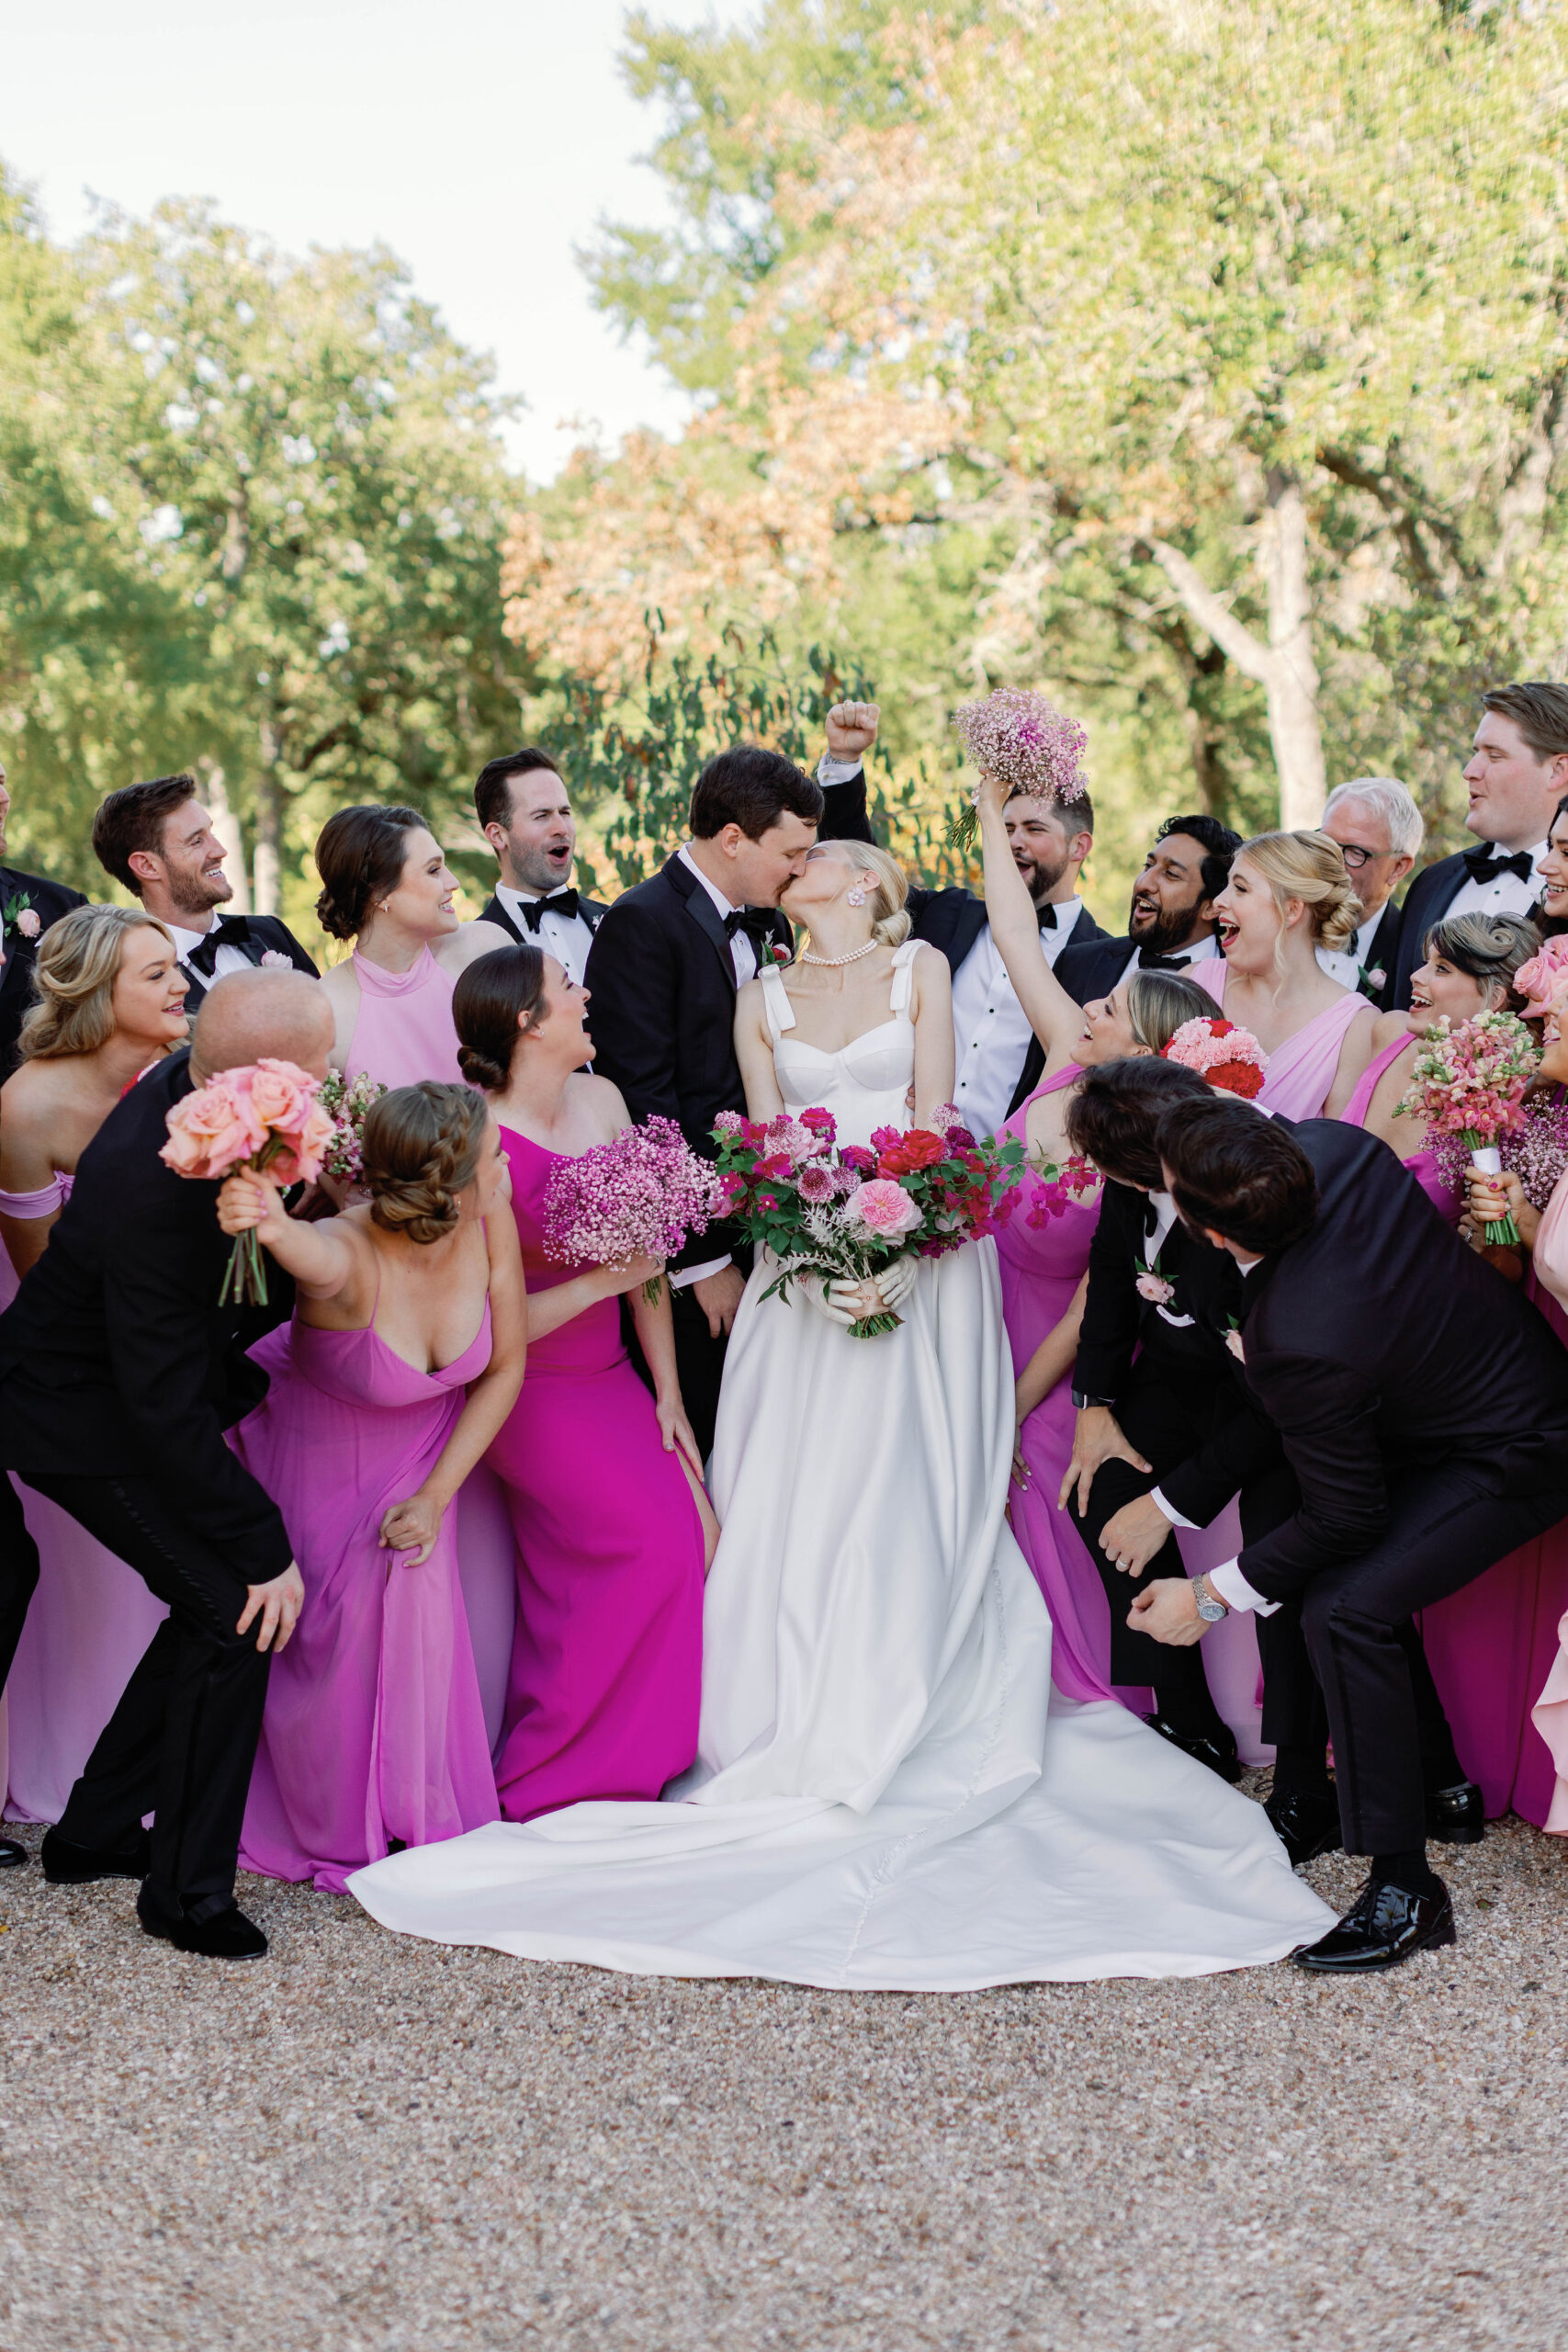 Bride and groom kiss surrounded by their bridal party as they celebrate their wedding at The Grand Lady in Texas. | Photo by Sarah Block Photography